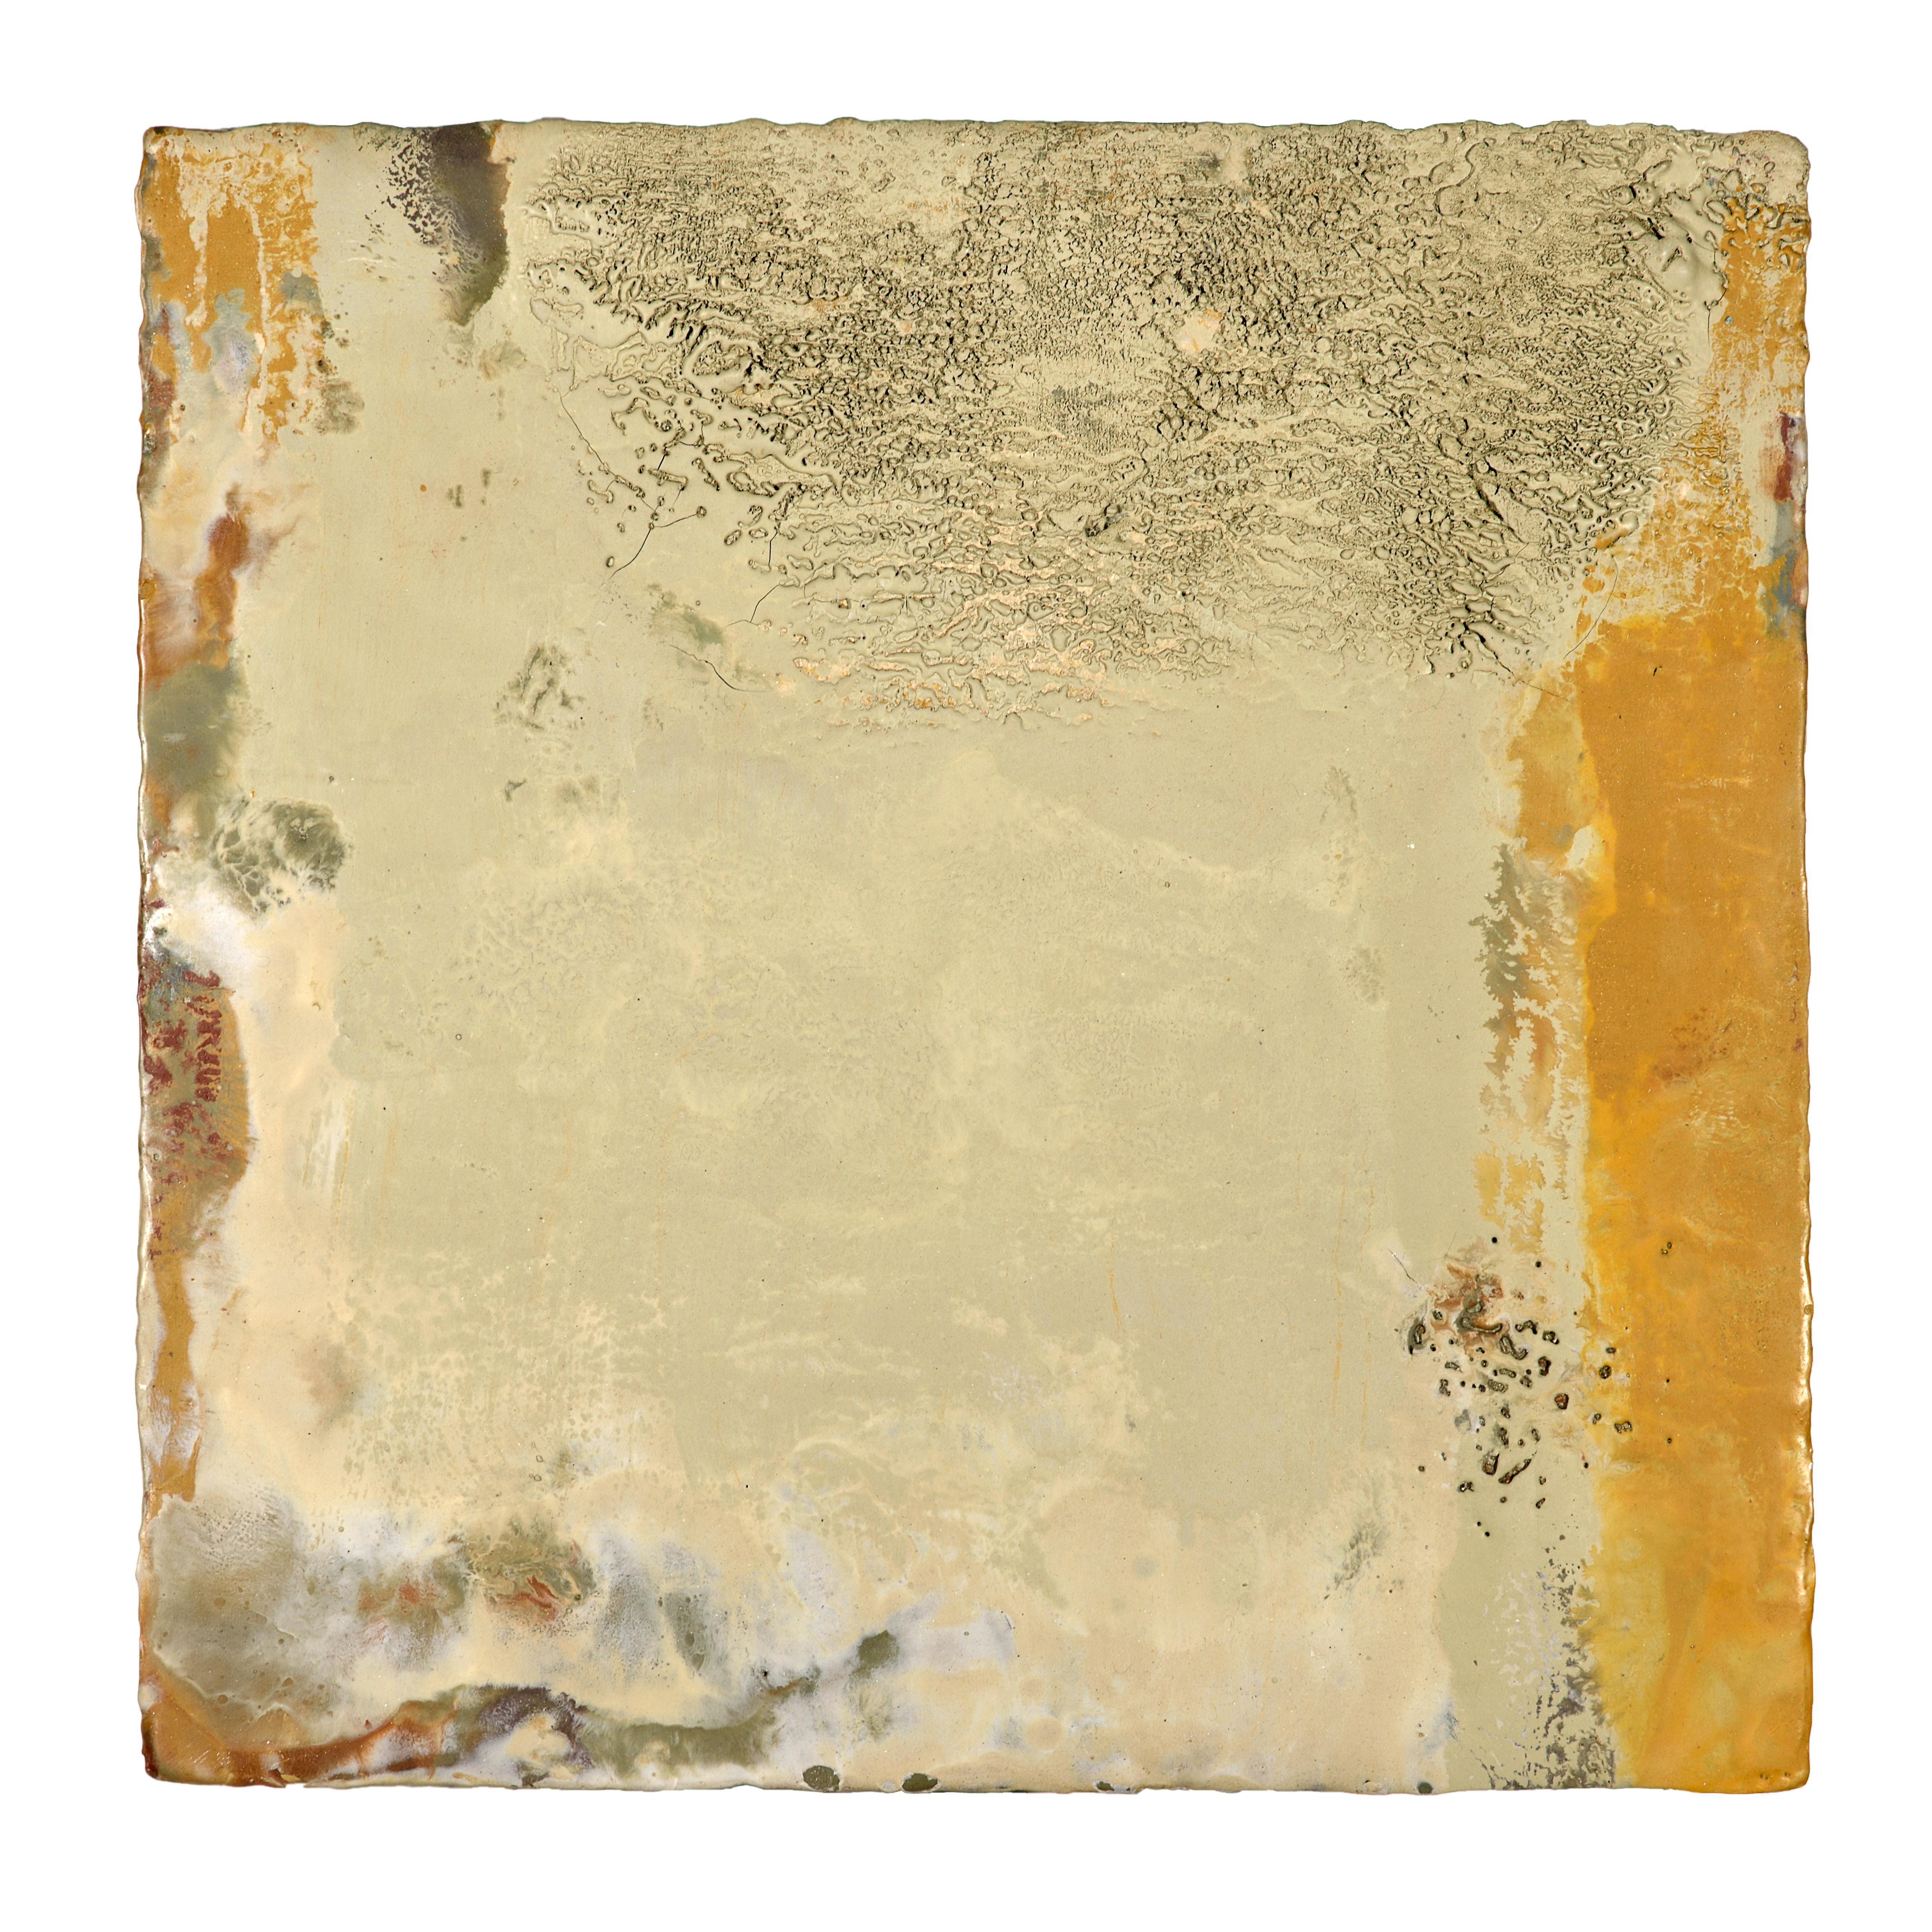 Modern Richard Hirsch Encaustic Painting of Nothing #40, 2014 For Sale